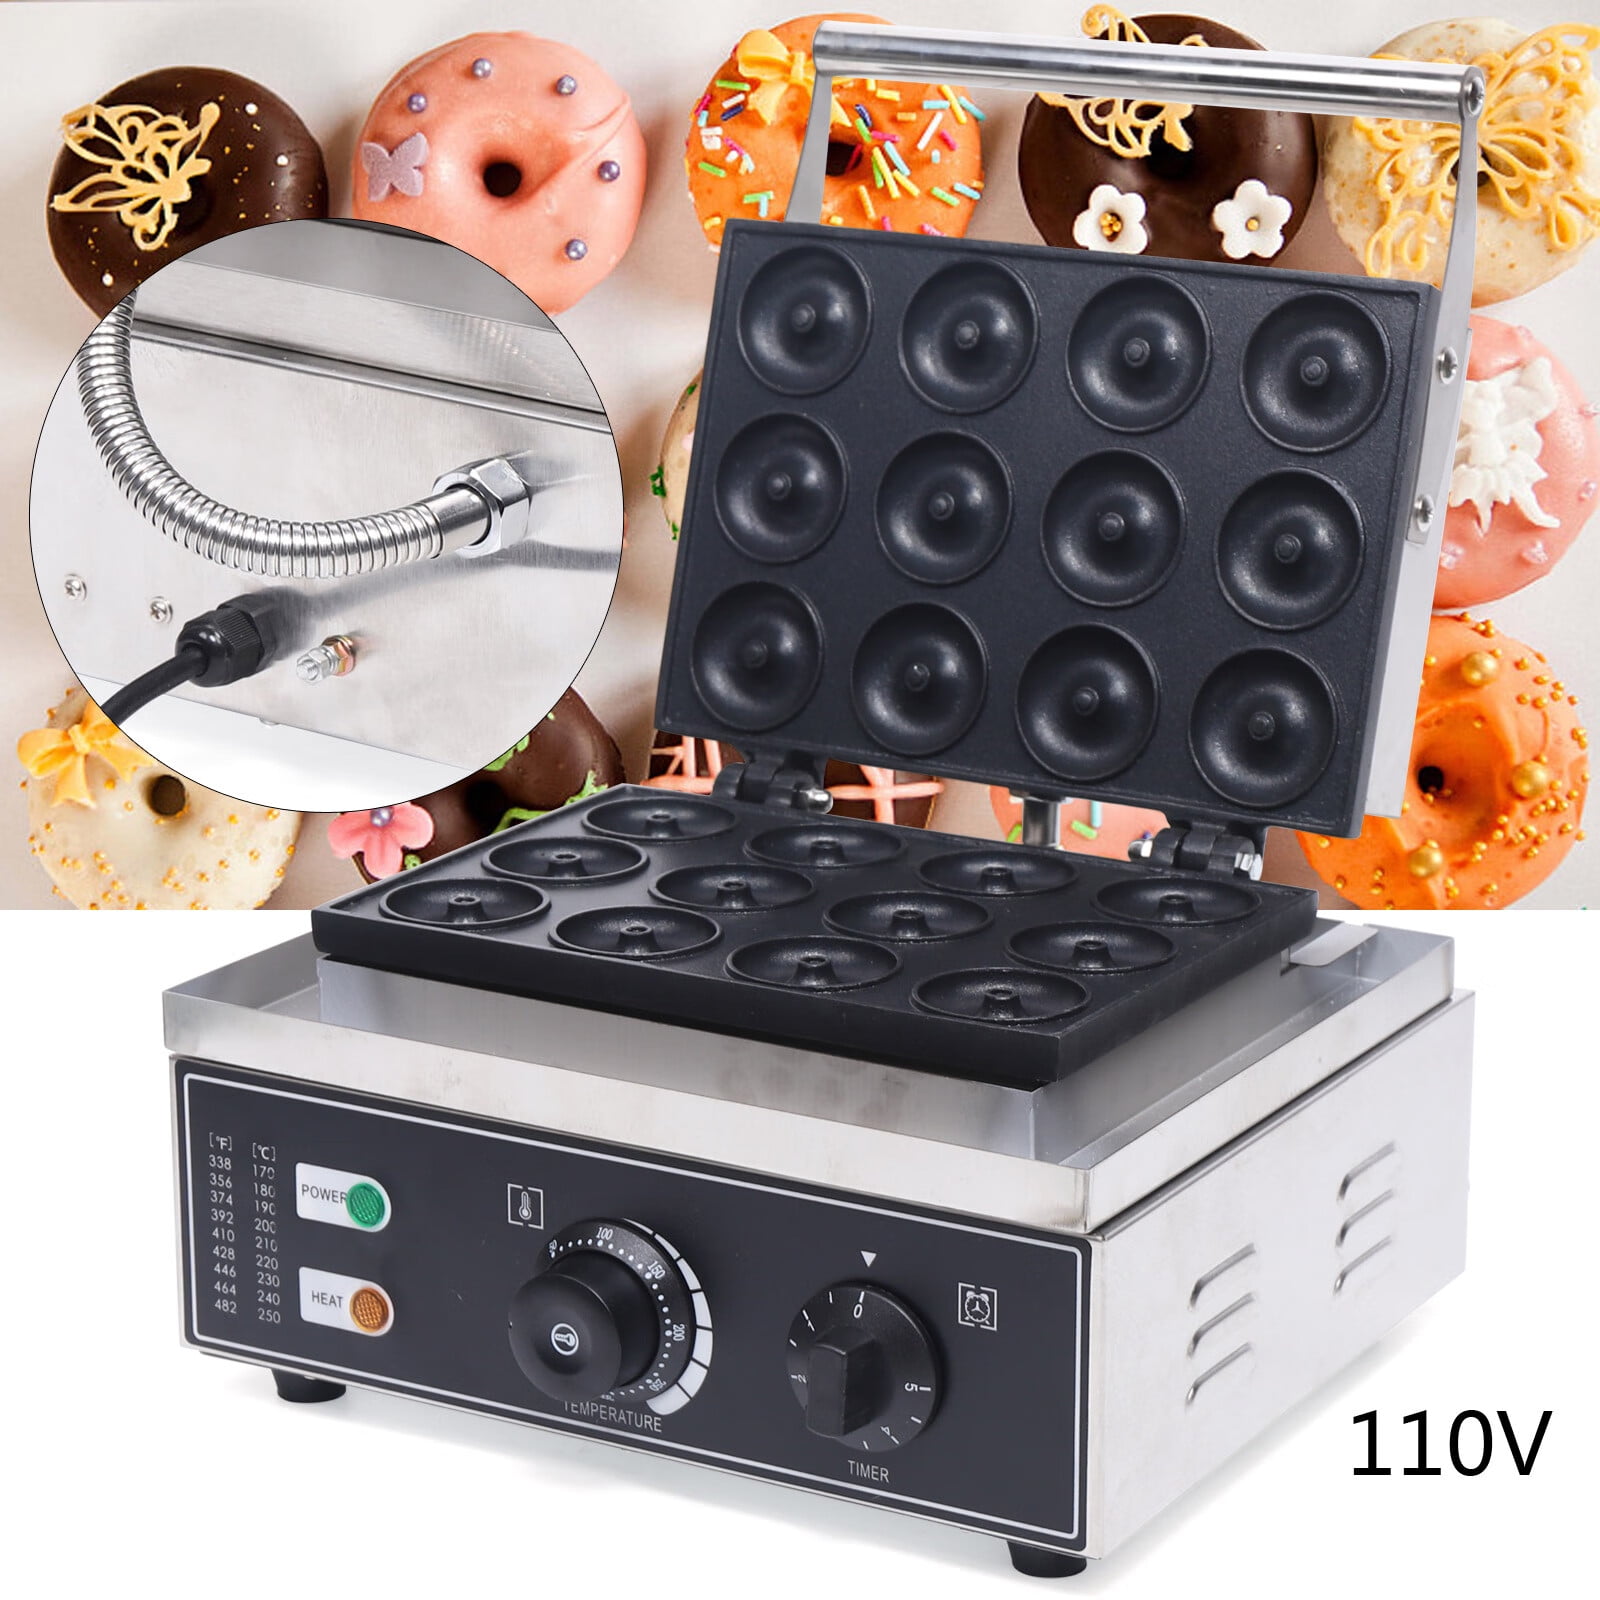 Donut Maker - 12 Mini Donuts - Ø5cm - with Built-in Timer - Maxima